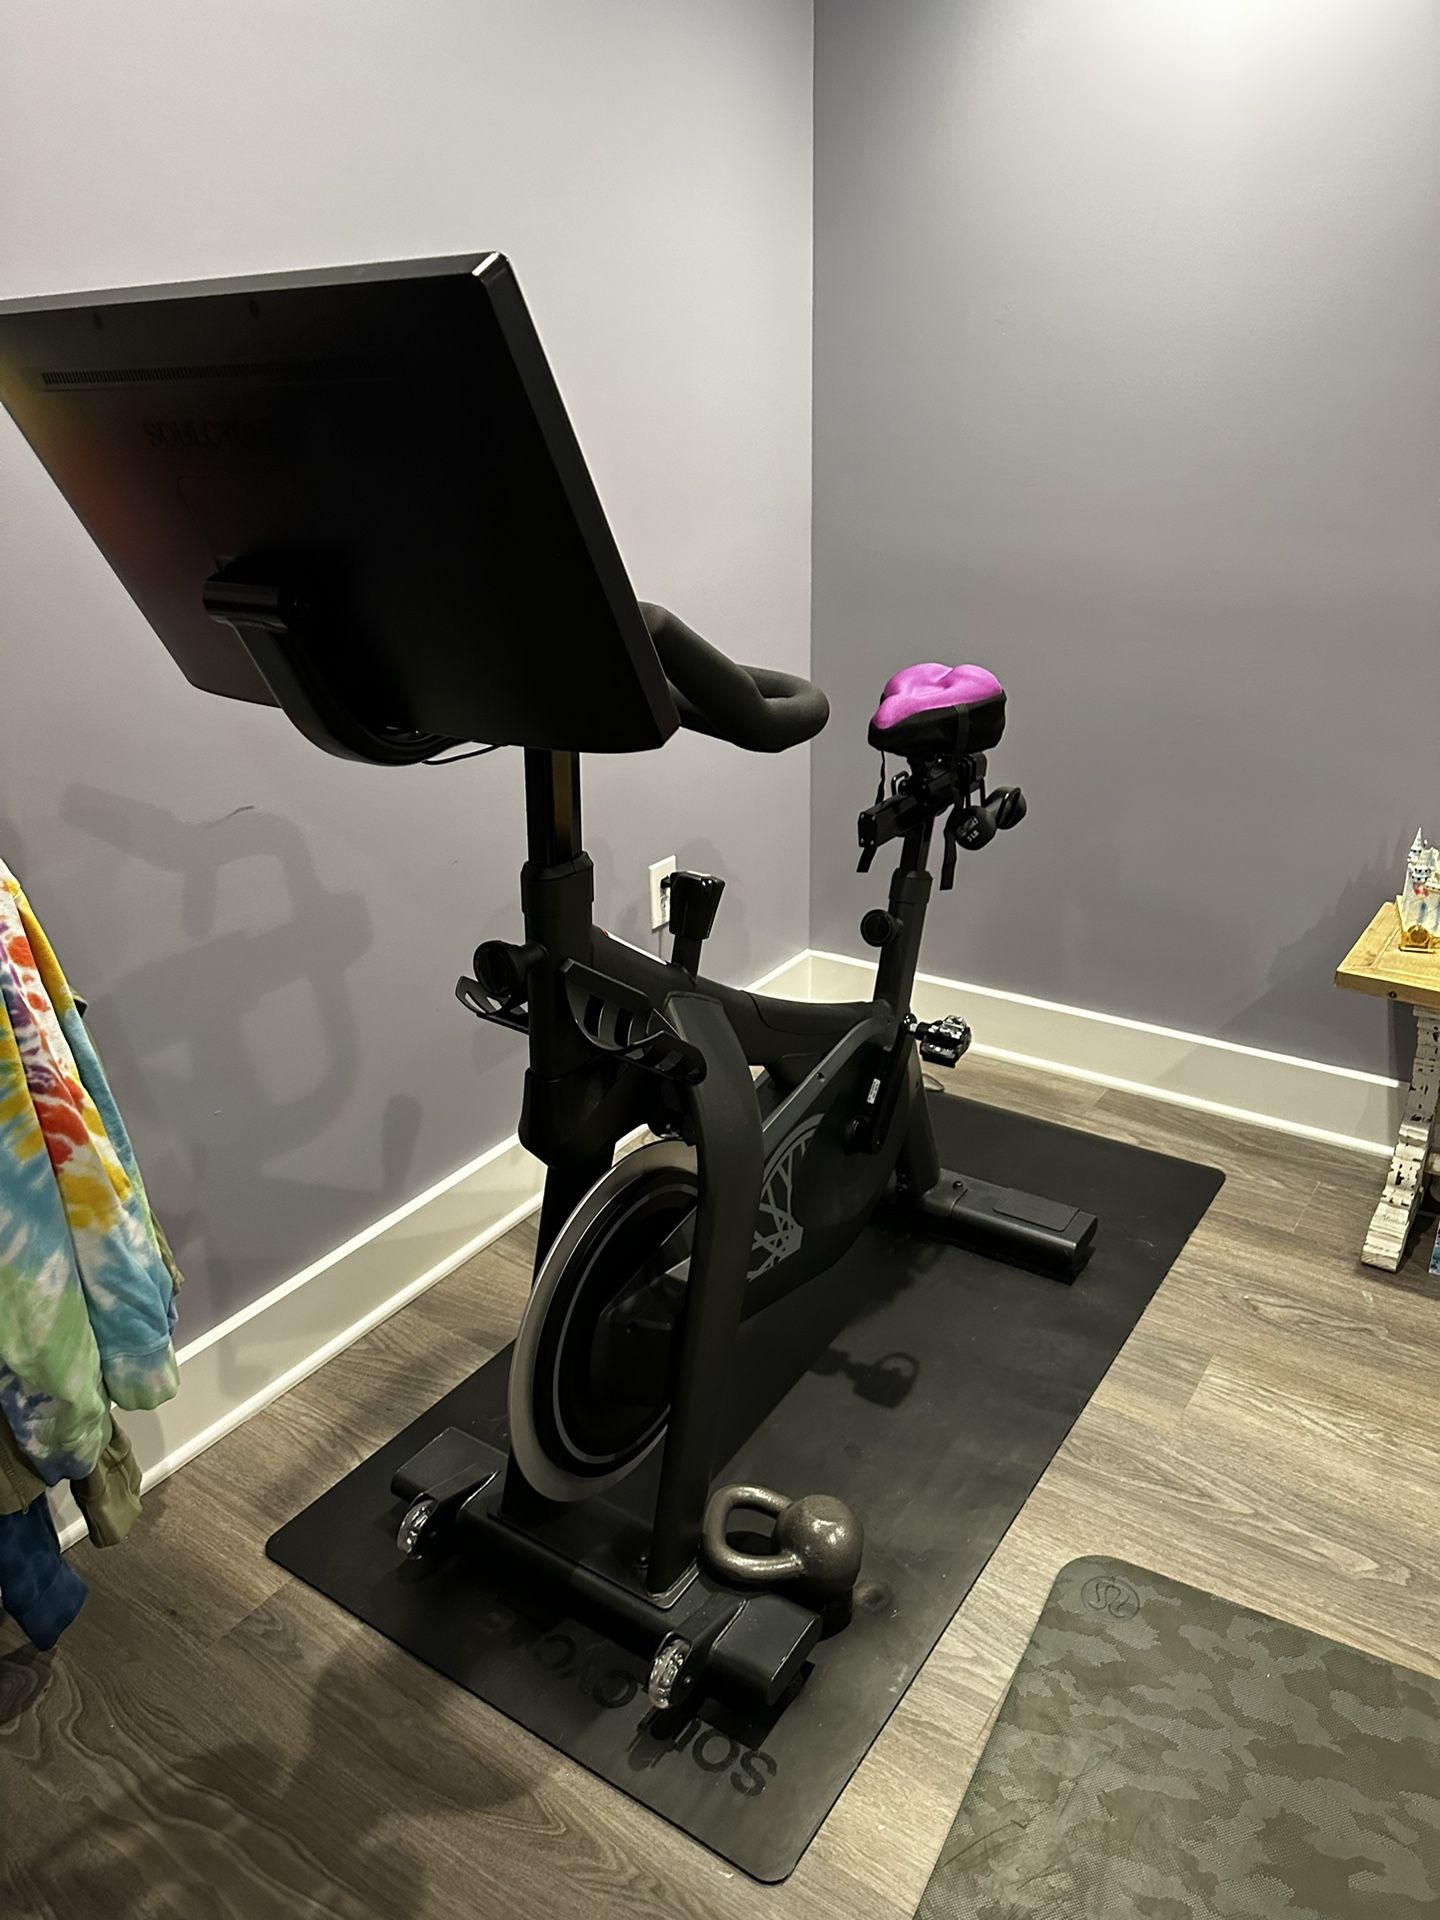 SoulCycle At home bike - Ring in Your New Years Resolutions With This Beauty!